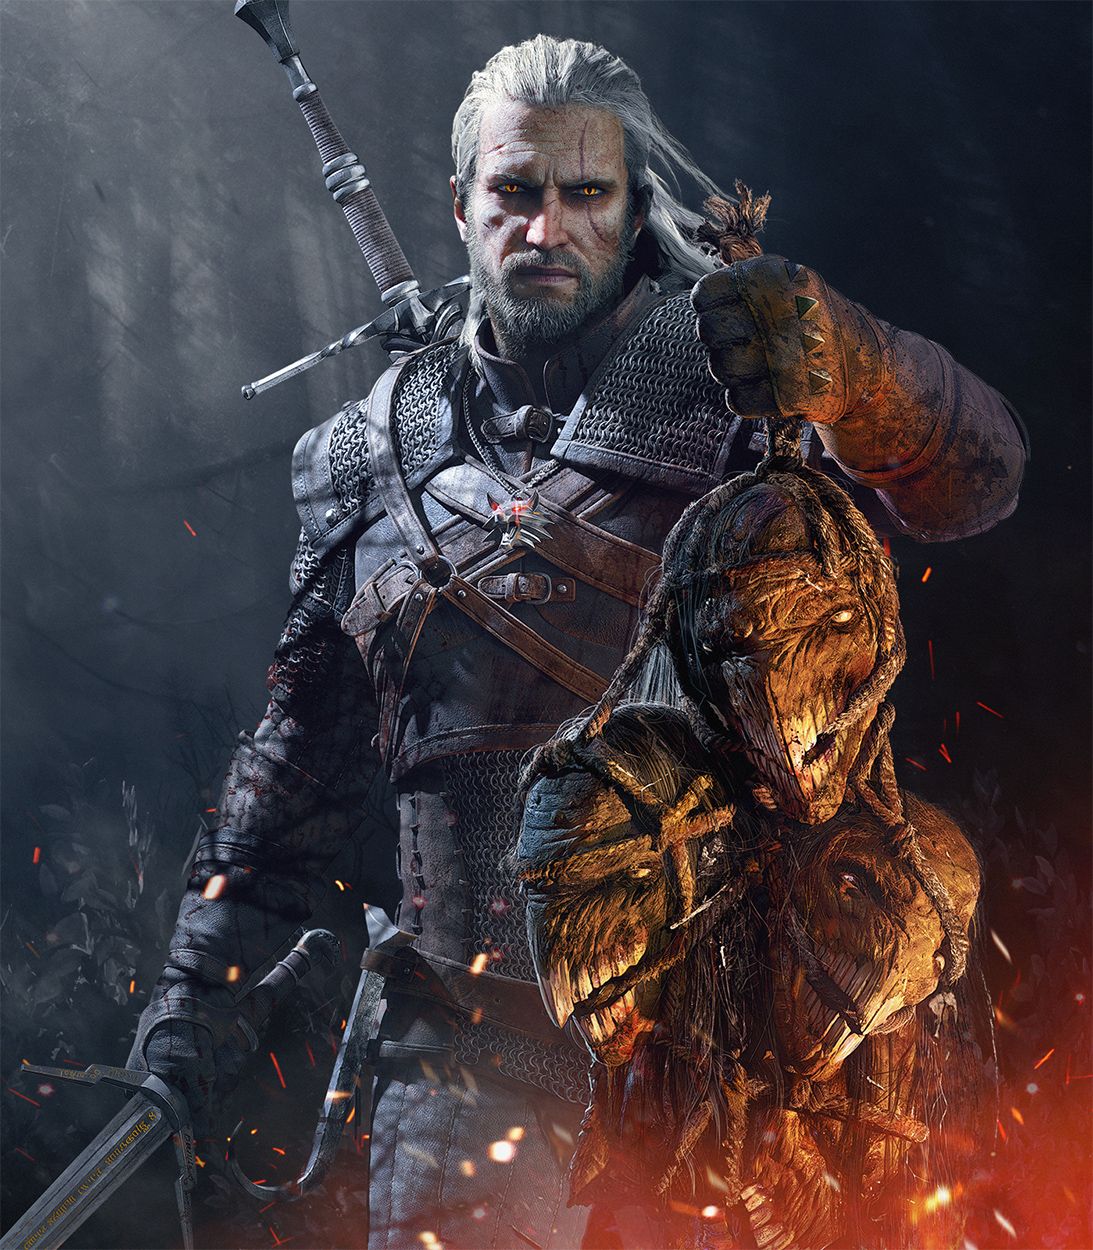 TLDR The Witcher 3 Artwork